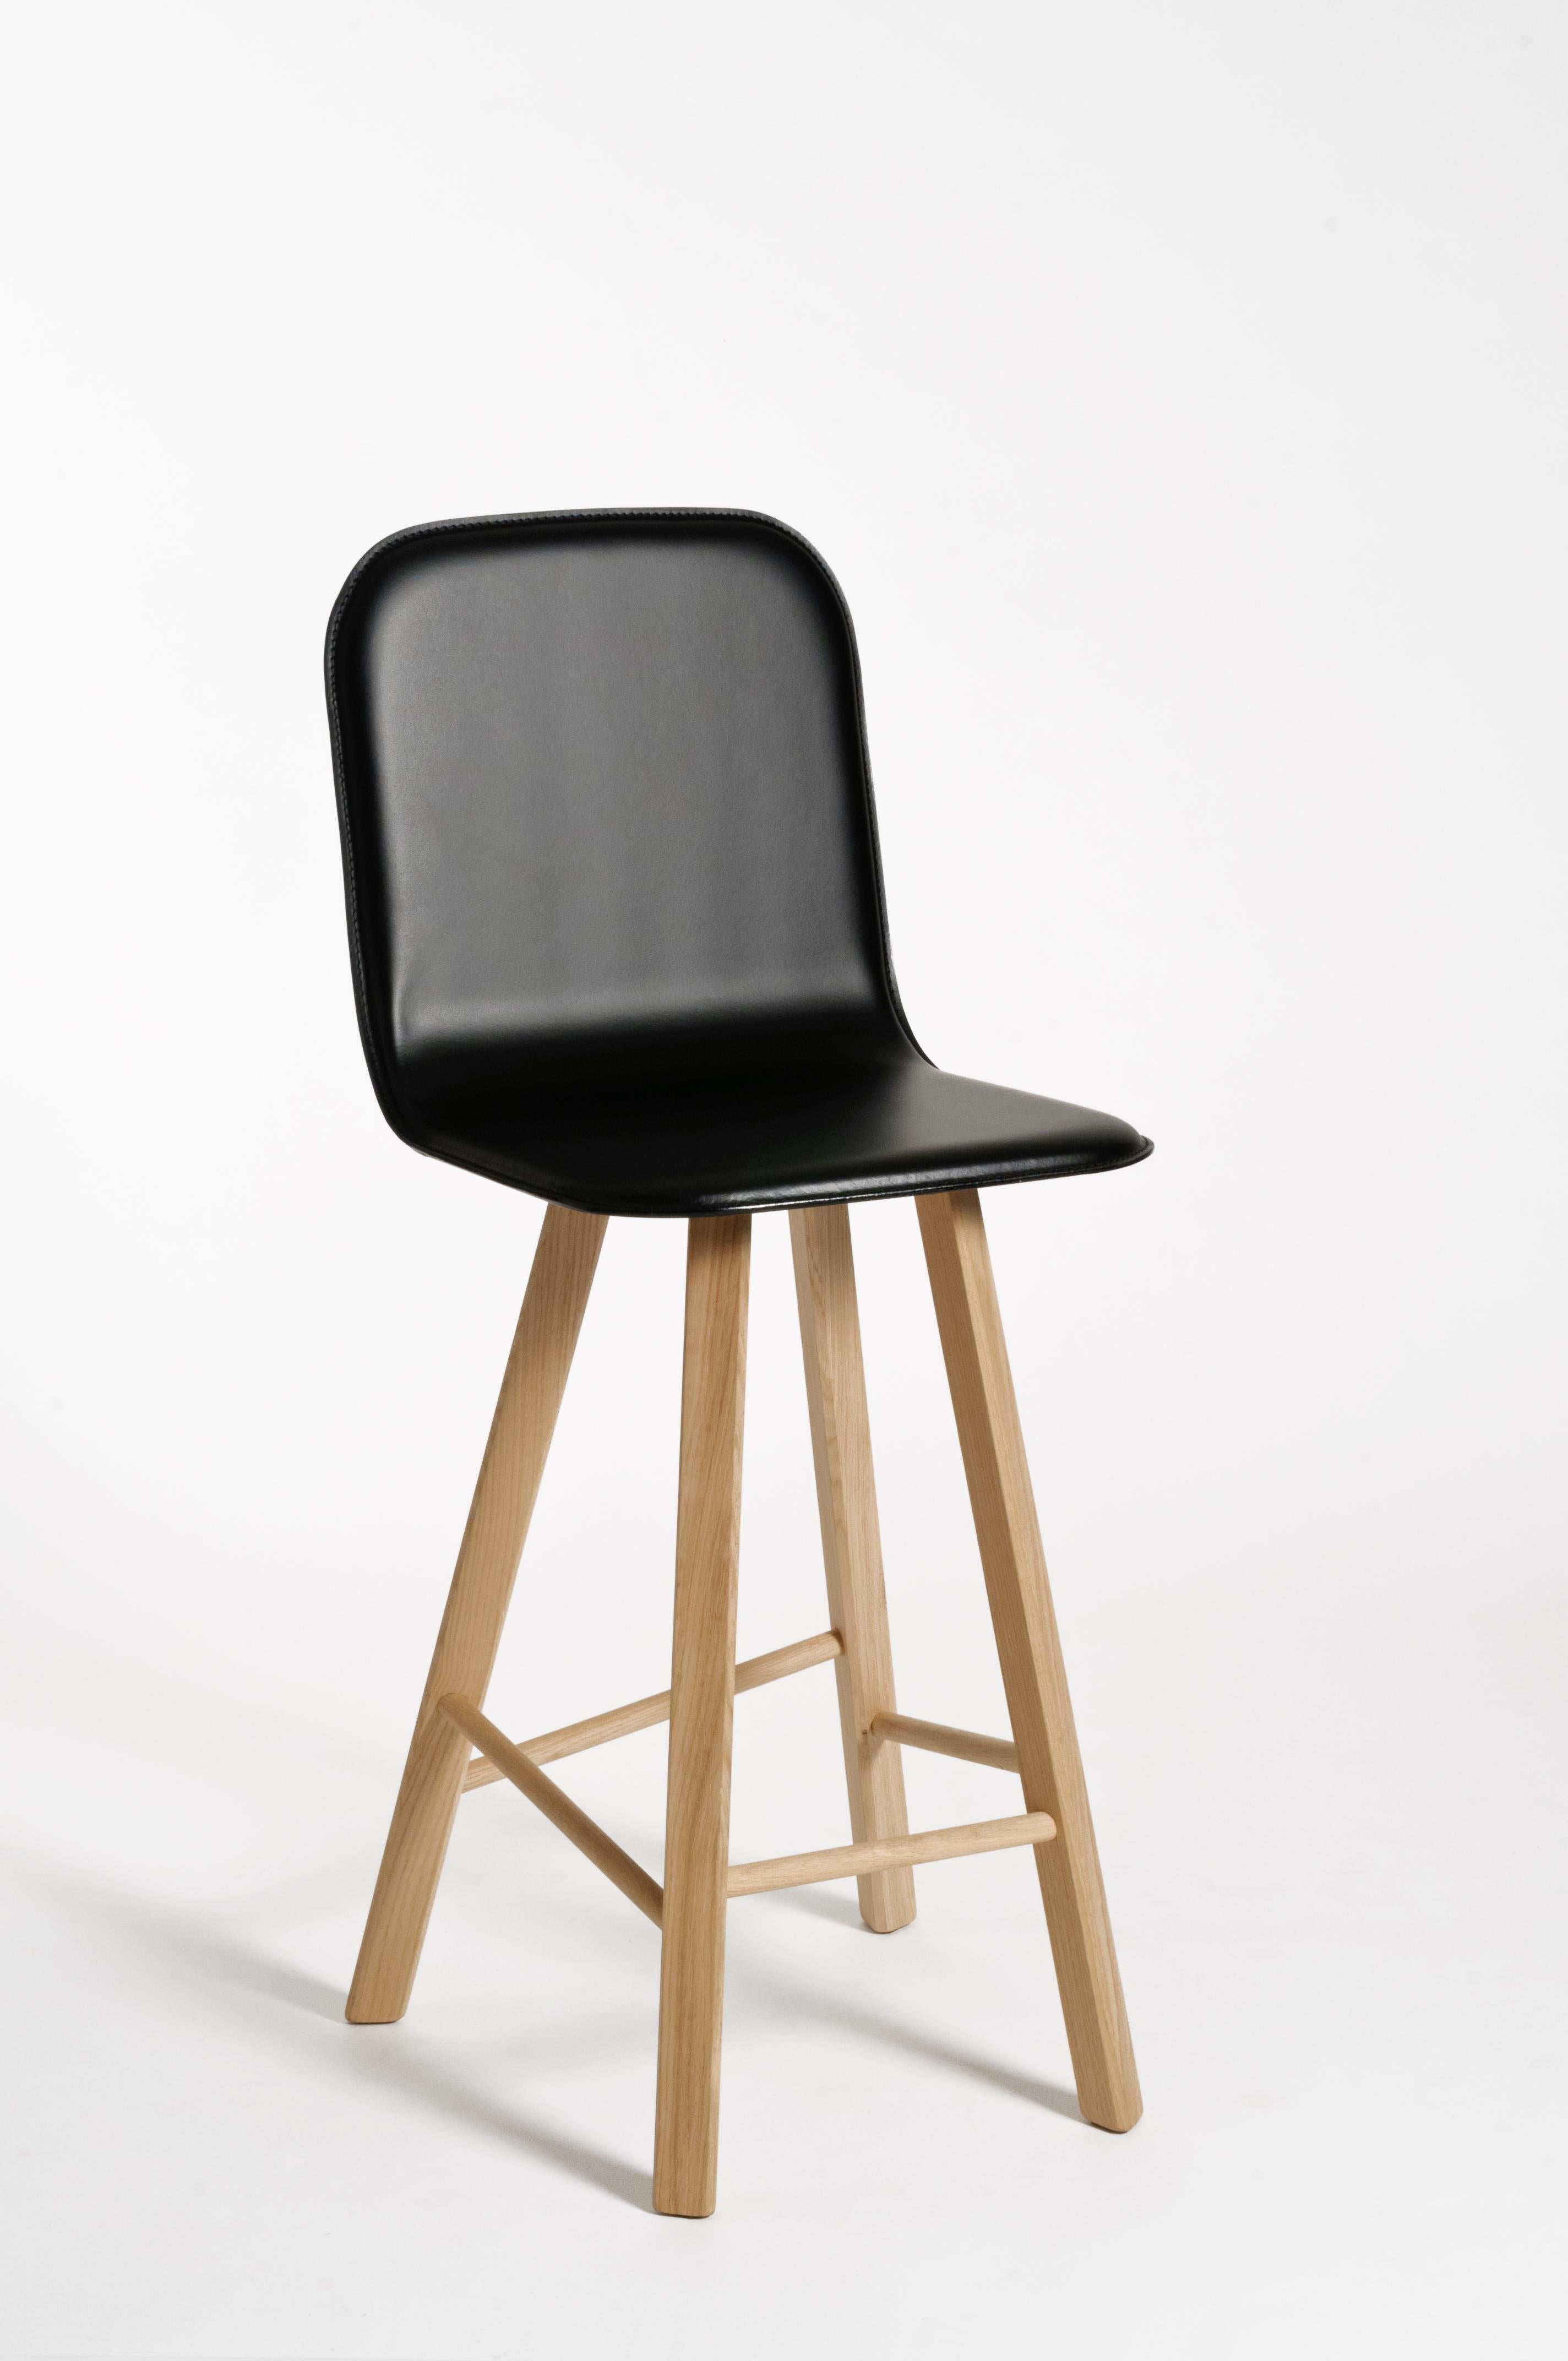 Essential and elegant stool with a bent plywood shell and four iconic legs with triangular shape in solid oak, joined by transversal wooden bars. The seat can have High Back as listed, for a very comfortable long time seating, or Low Back as a